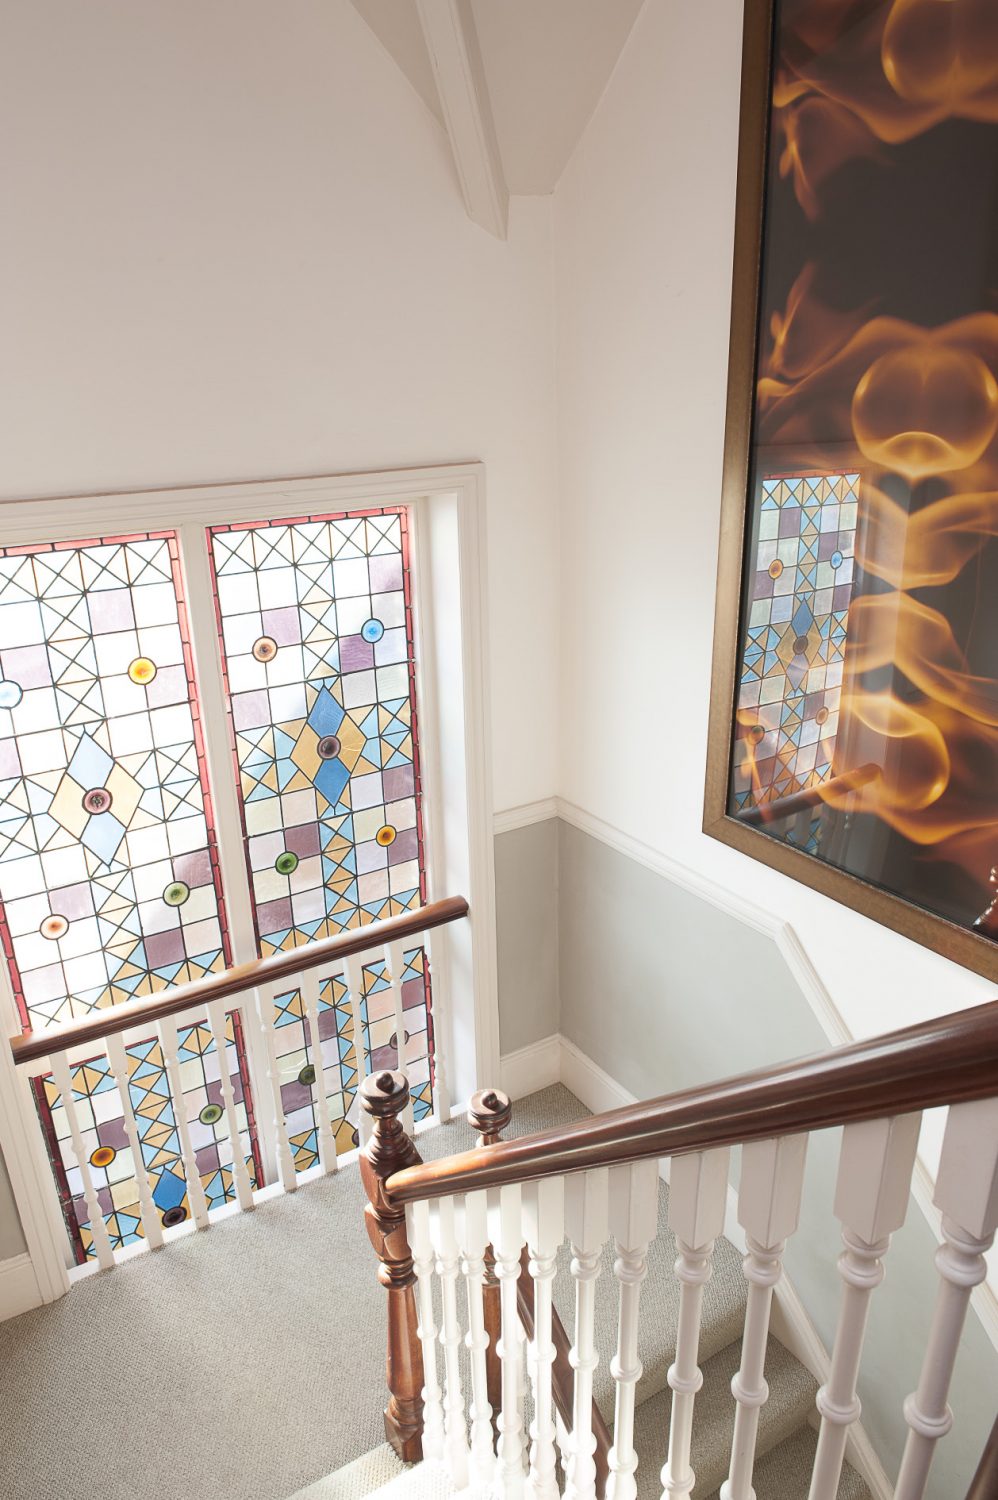 As we climb the stairs we come across a huge photograph of flames, manipulated using Photoshop into a giant fire design. The first room we enter is called Hafez. The room has a tranquil, airy feel and despite the fairly dark coloured walls is flooded by light from the huge bay window...